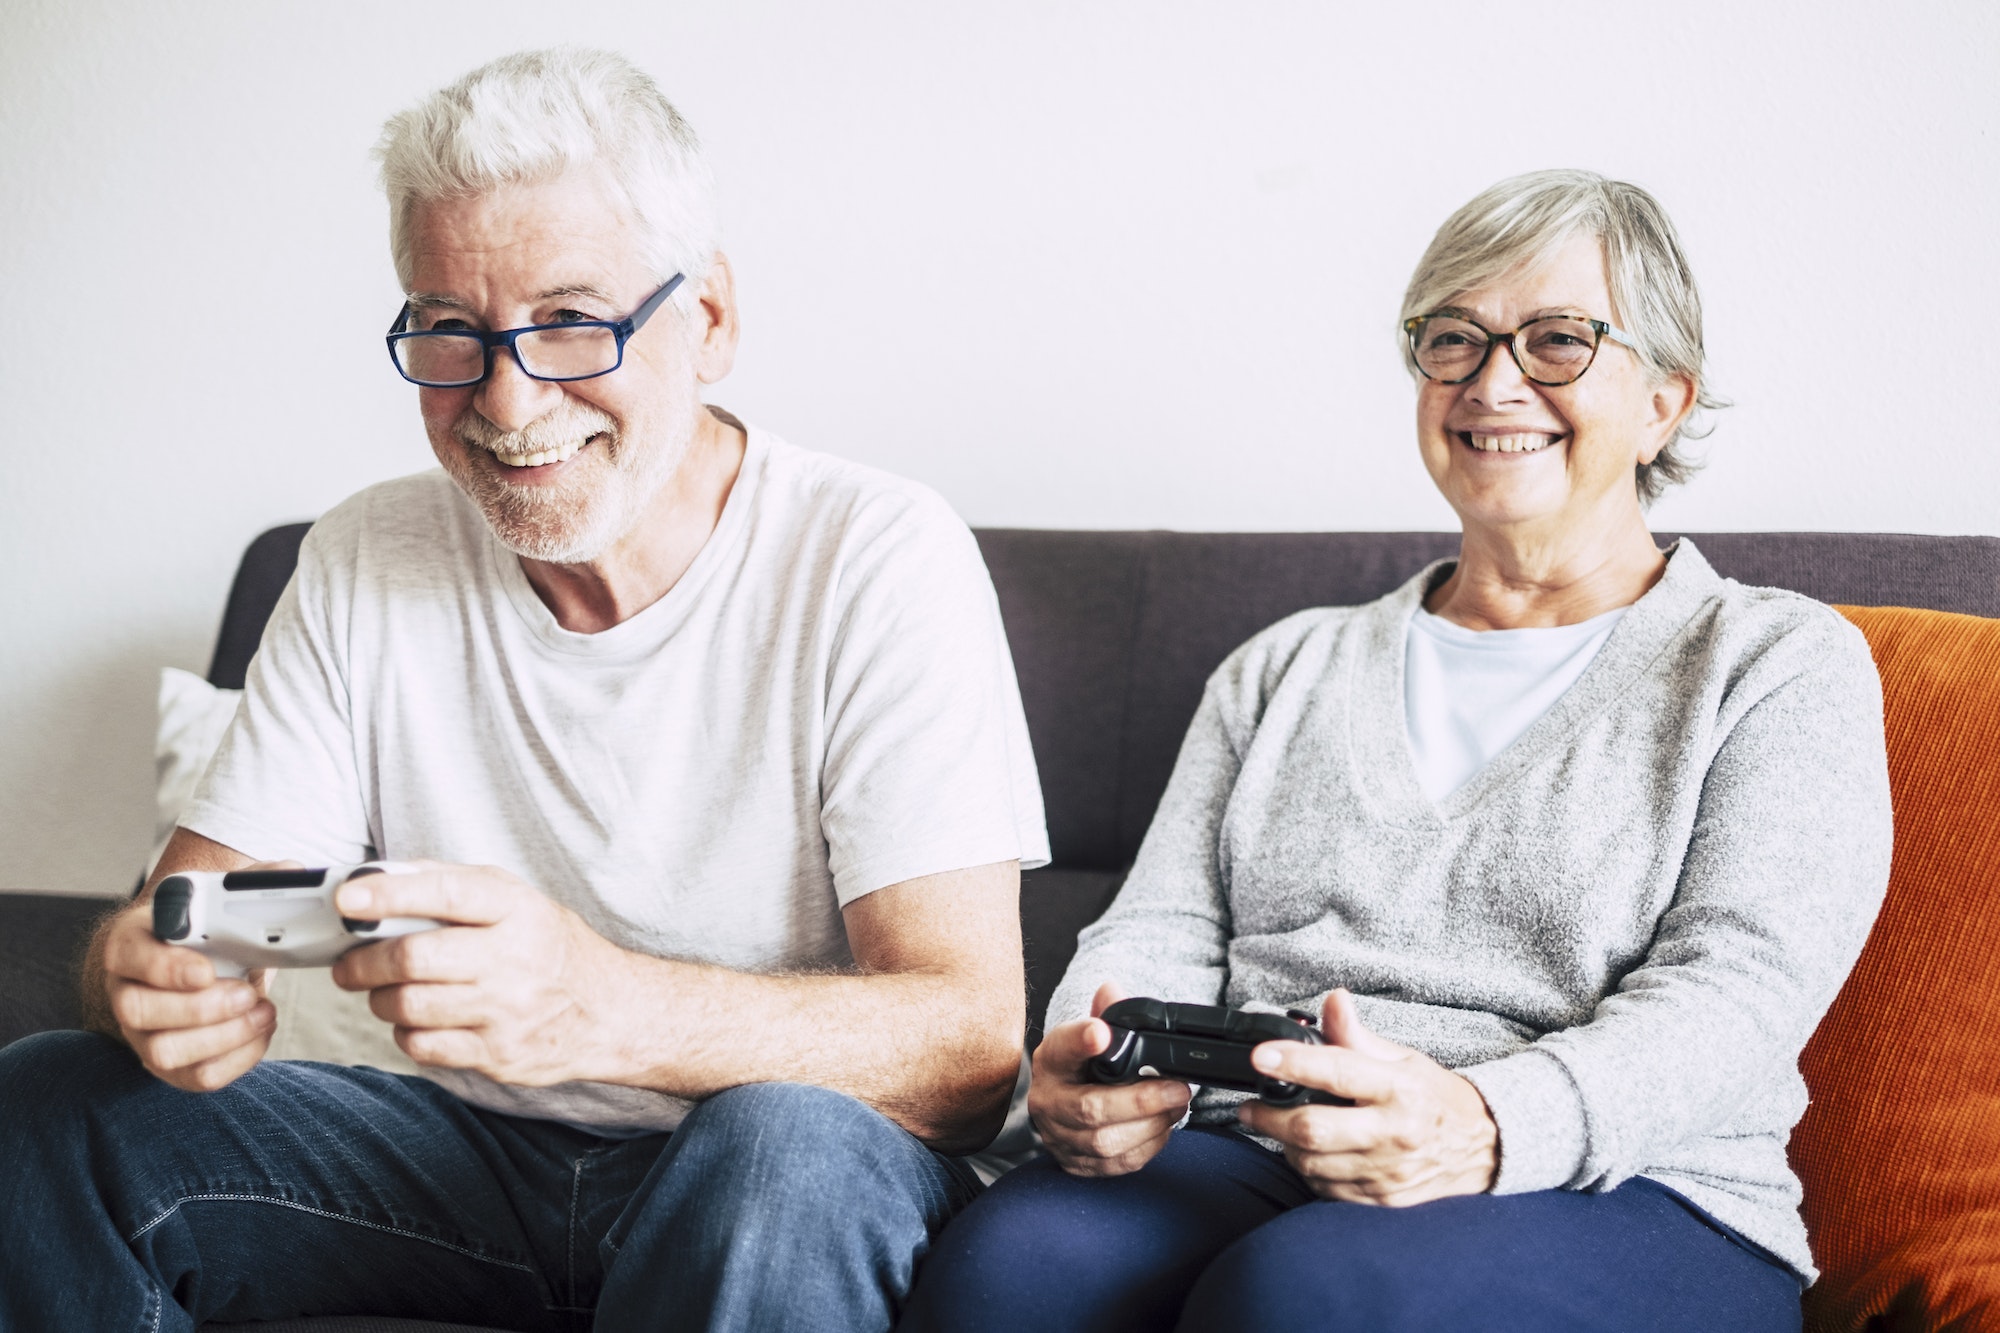 Game Apps For Seniors With Dementia – Try These Options